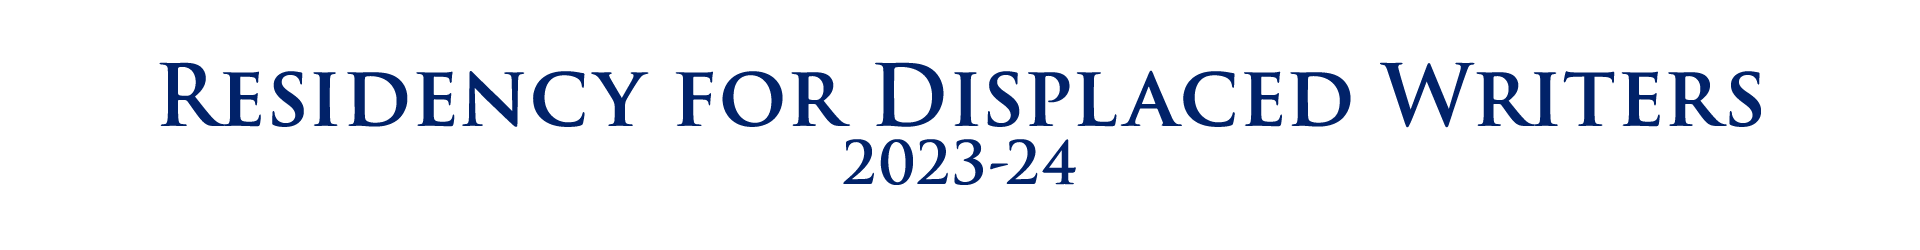 Residency for Displaced Writers 2023-24